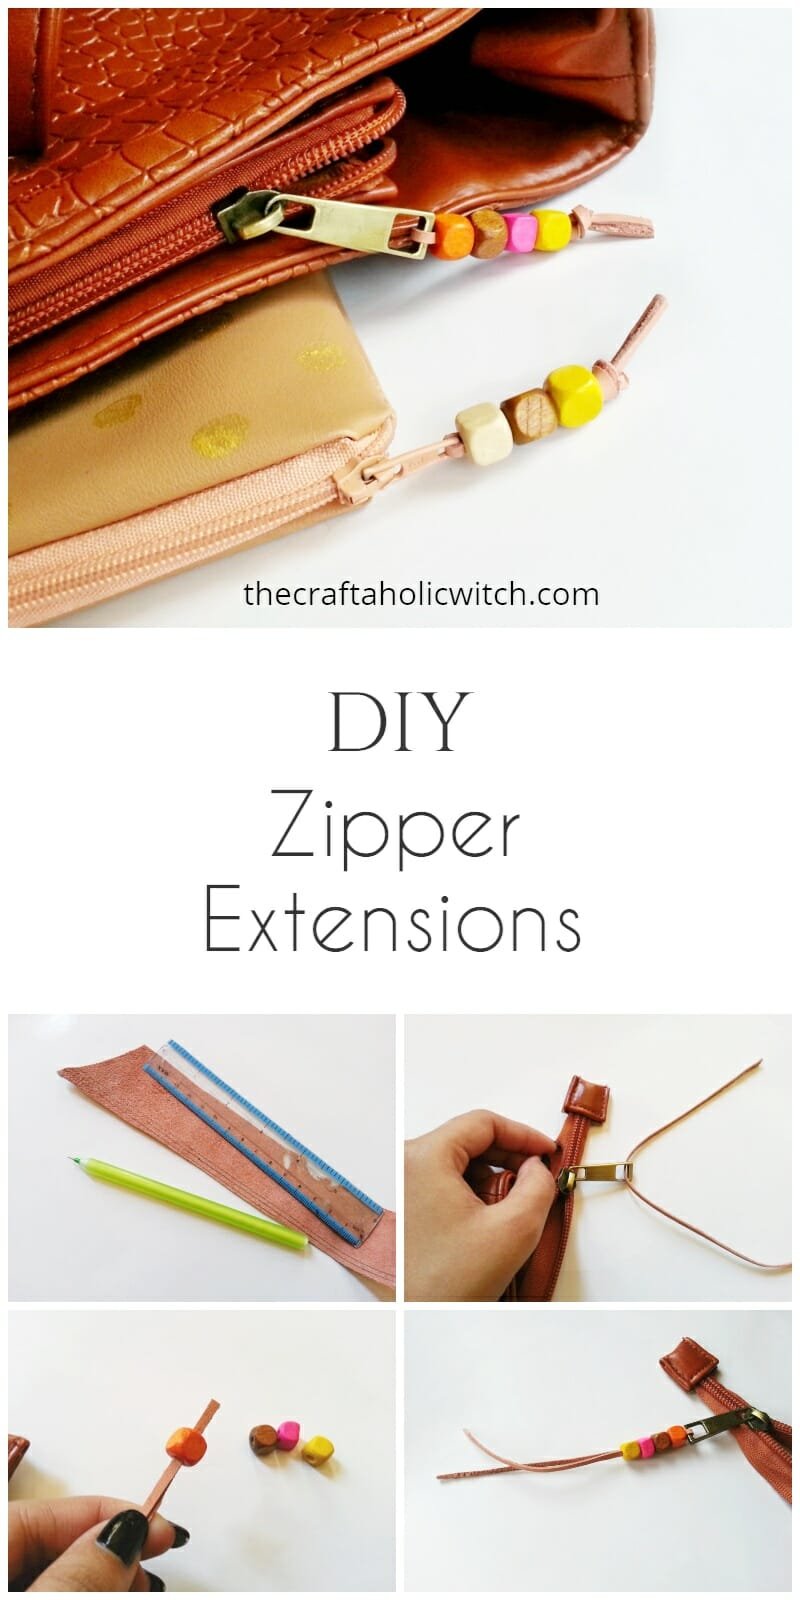 zipper extensions pin image - DIY Leather Zipper Extensions